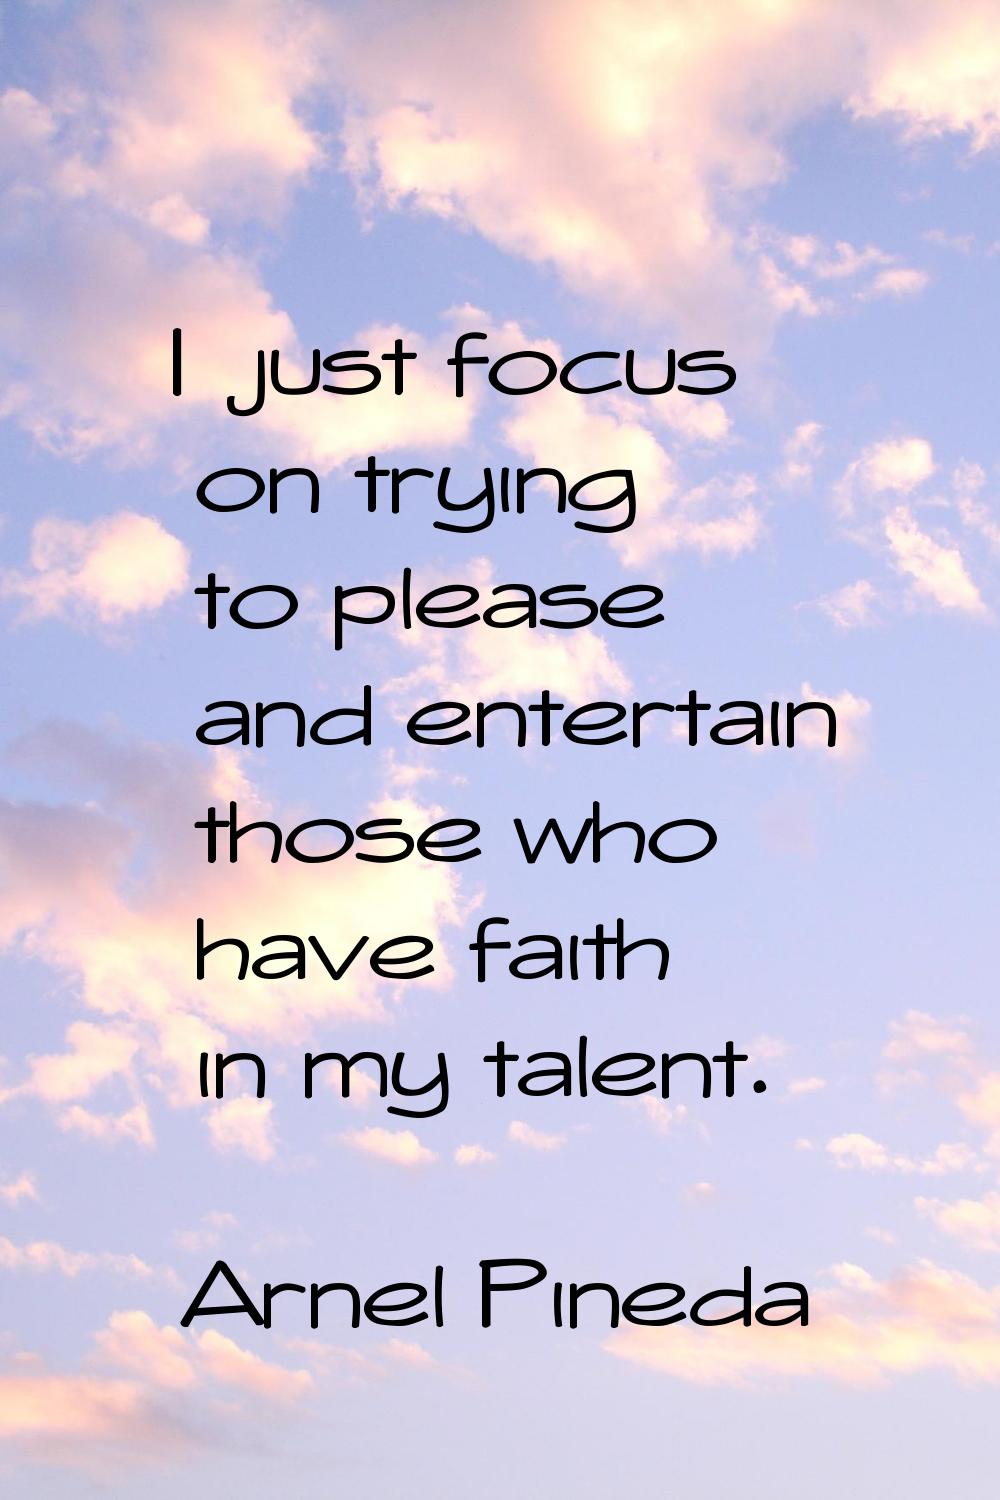 I just focus on trying to please and entertain those who have faith in my talent.